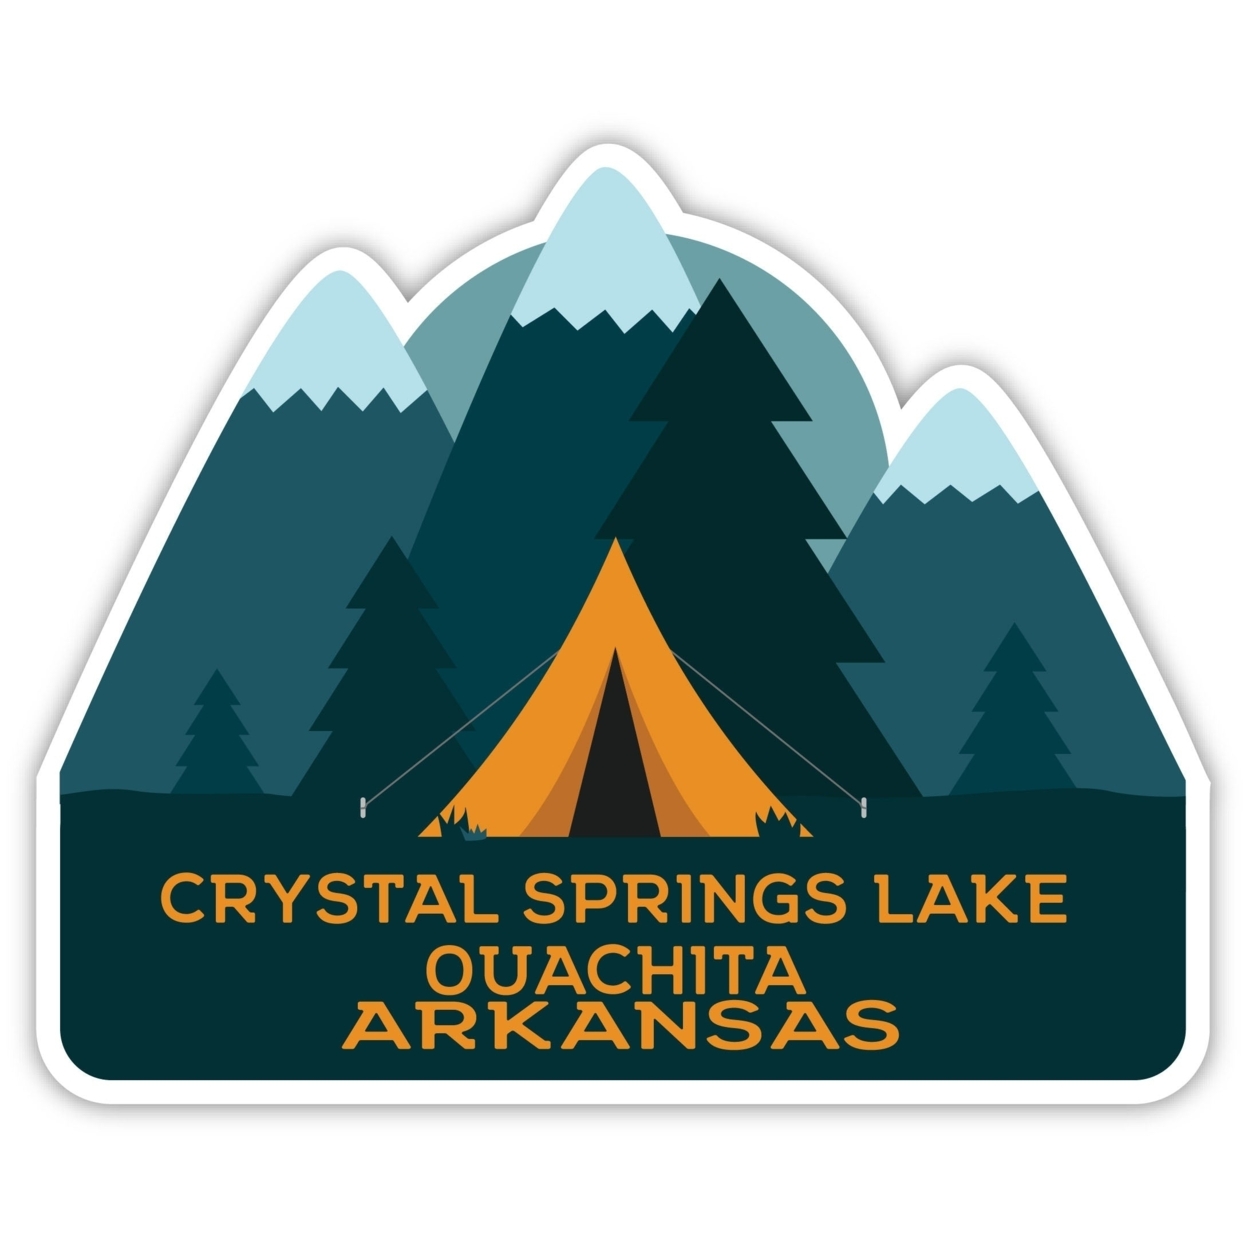 Crystal Springs Lake Ouachita Arkansas Souvenir Decorative Stickers (Choose Theme And Size) - 4-Pack, 2-Inch, Tent